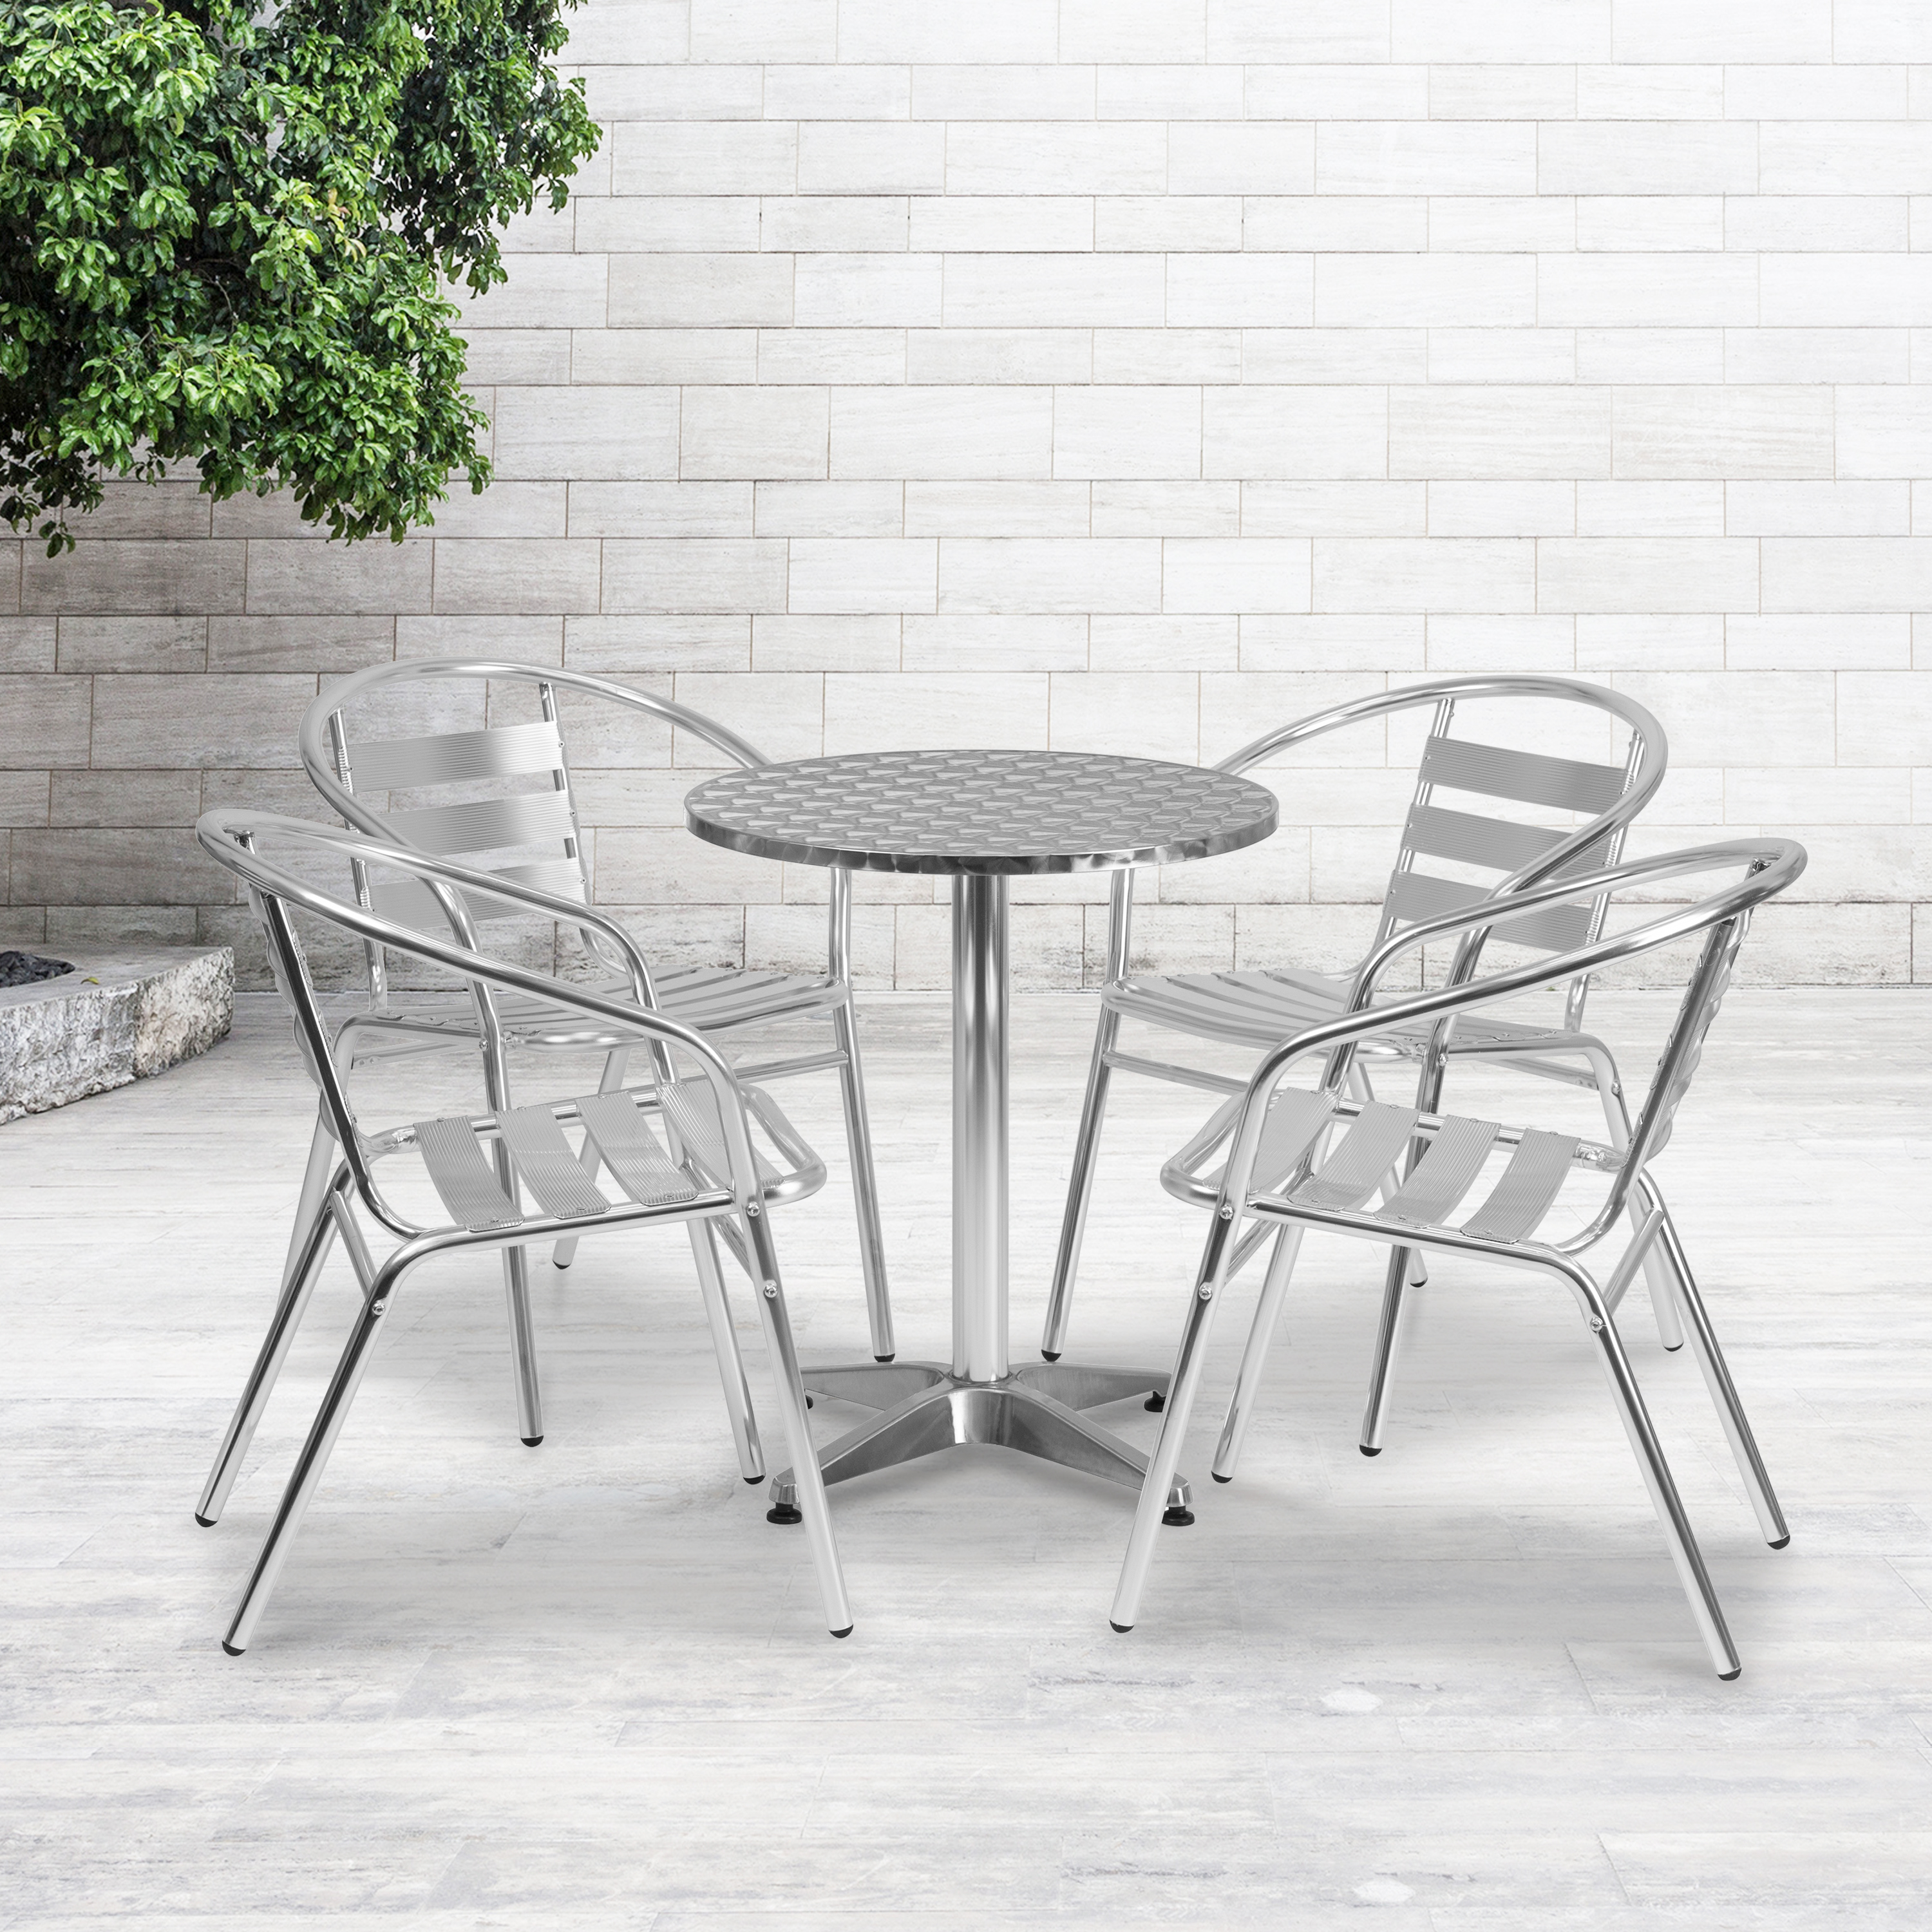 Flash Furniture 23.5'' Round Aluminum Indoor-Outdoor Table Set with 4 Slat Back Chairs - image 1 of 5